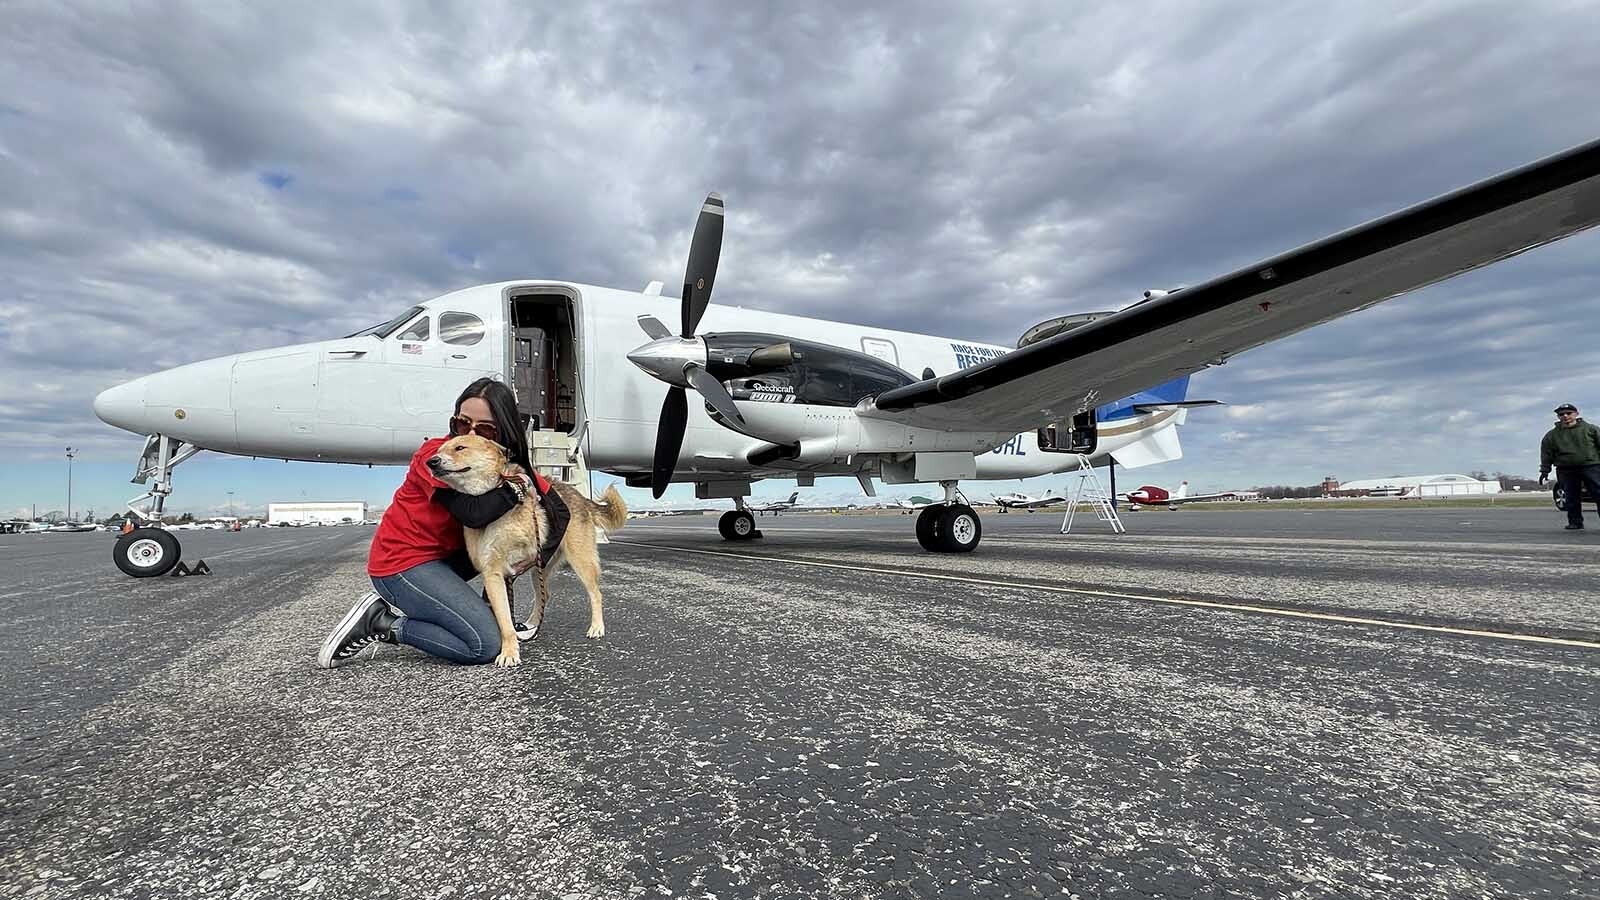 Volunteers from animal rescues all over the country worked with the Society for the Prevention of Cruelty of Animals (SPCA) International to find homes for the 70 rescued dogs.